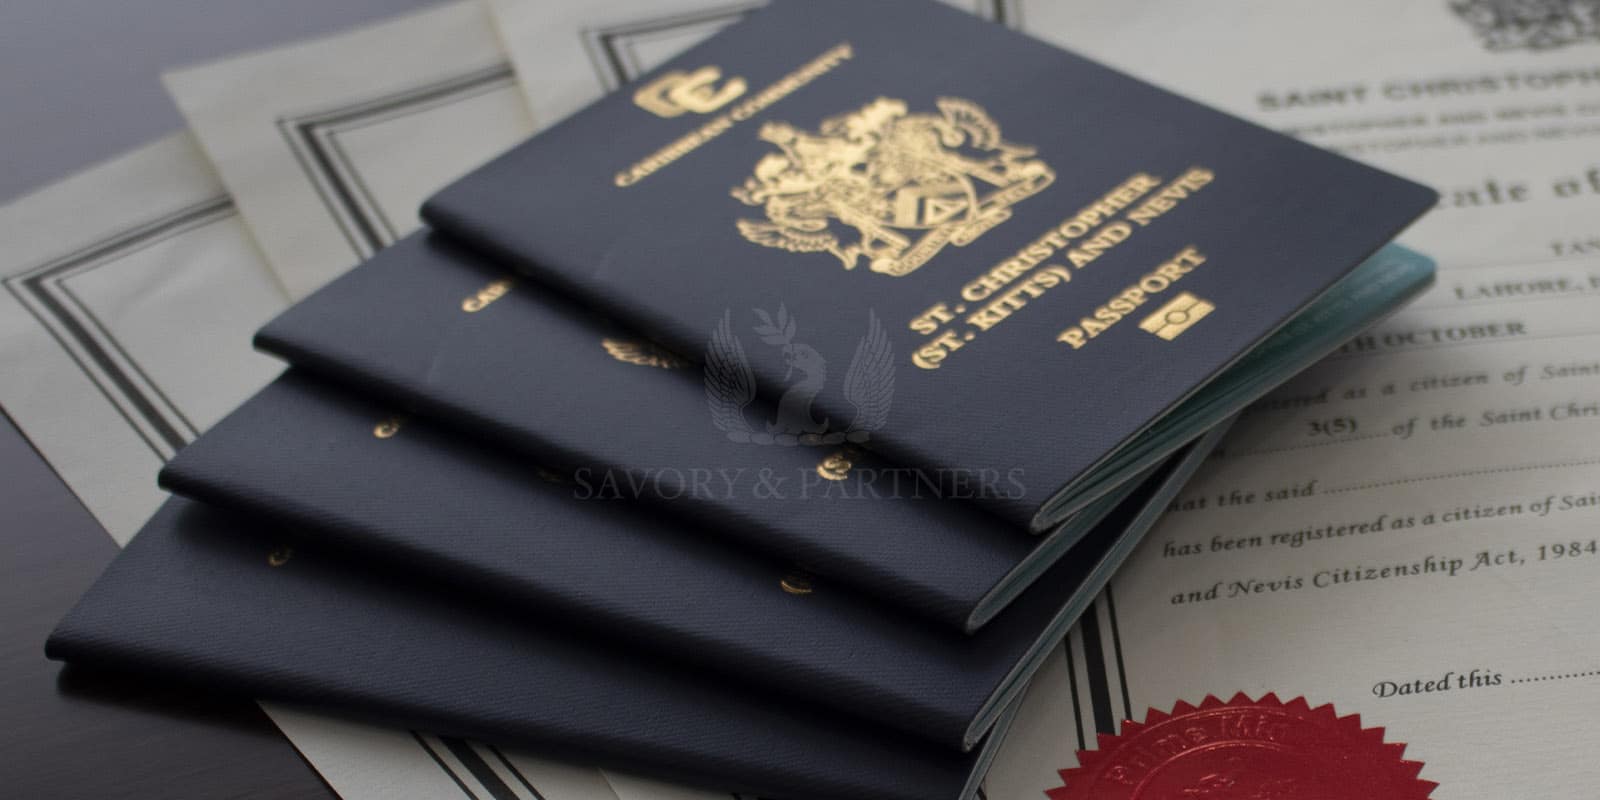 Passports from St Kitts & Nevis for a family of 4 members.